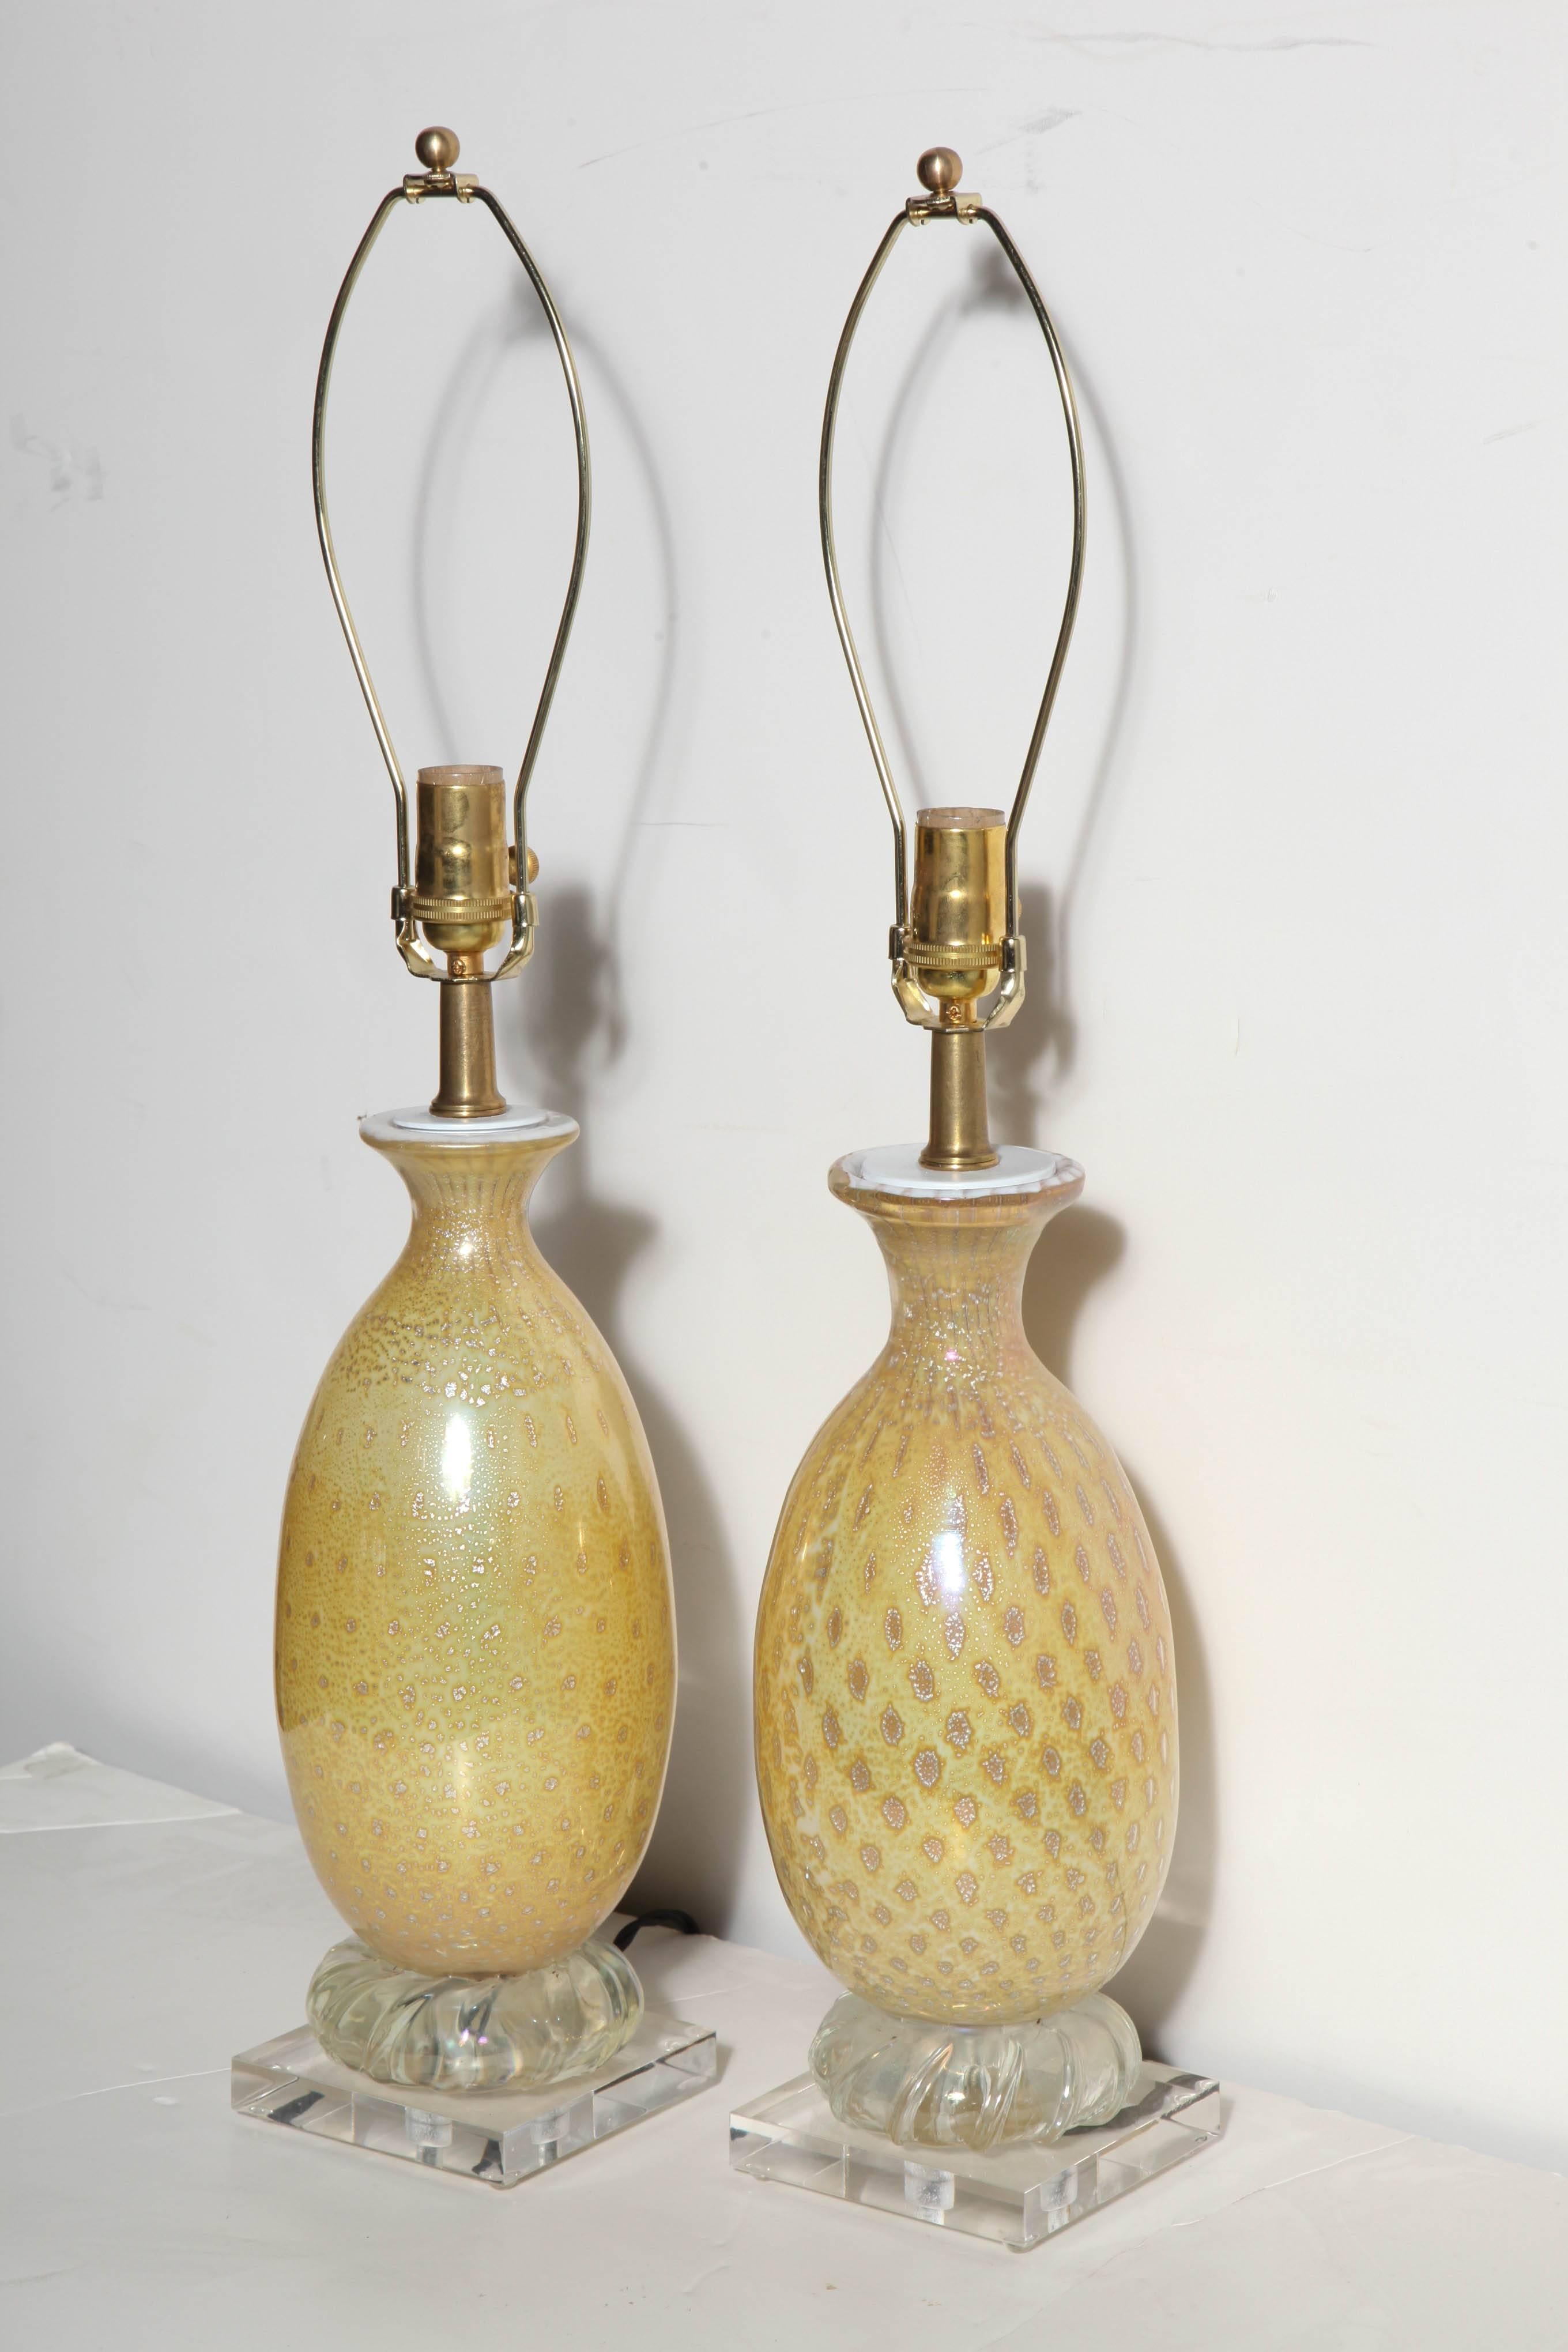 Two Italian Modern Alfredo Barbini style Yellow & White Murano Art Glass Table Lamps. Featuring hand blown bottle forms in White with Silver rimmed Gold inclusions. Brass neck. White cap. With round swirled clear glass detail above square 5H Lucite